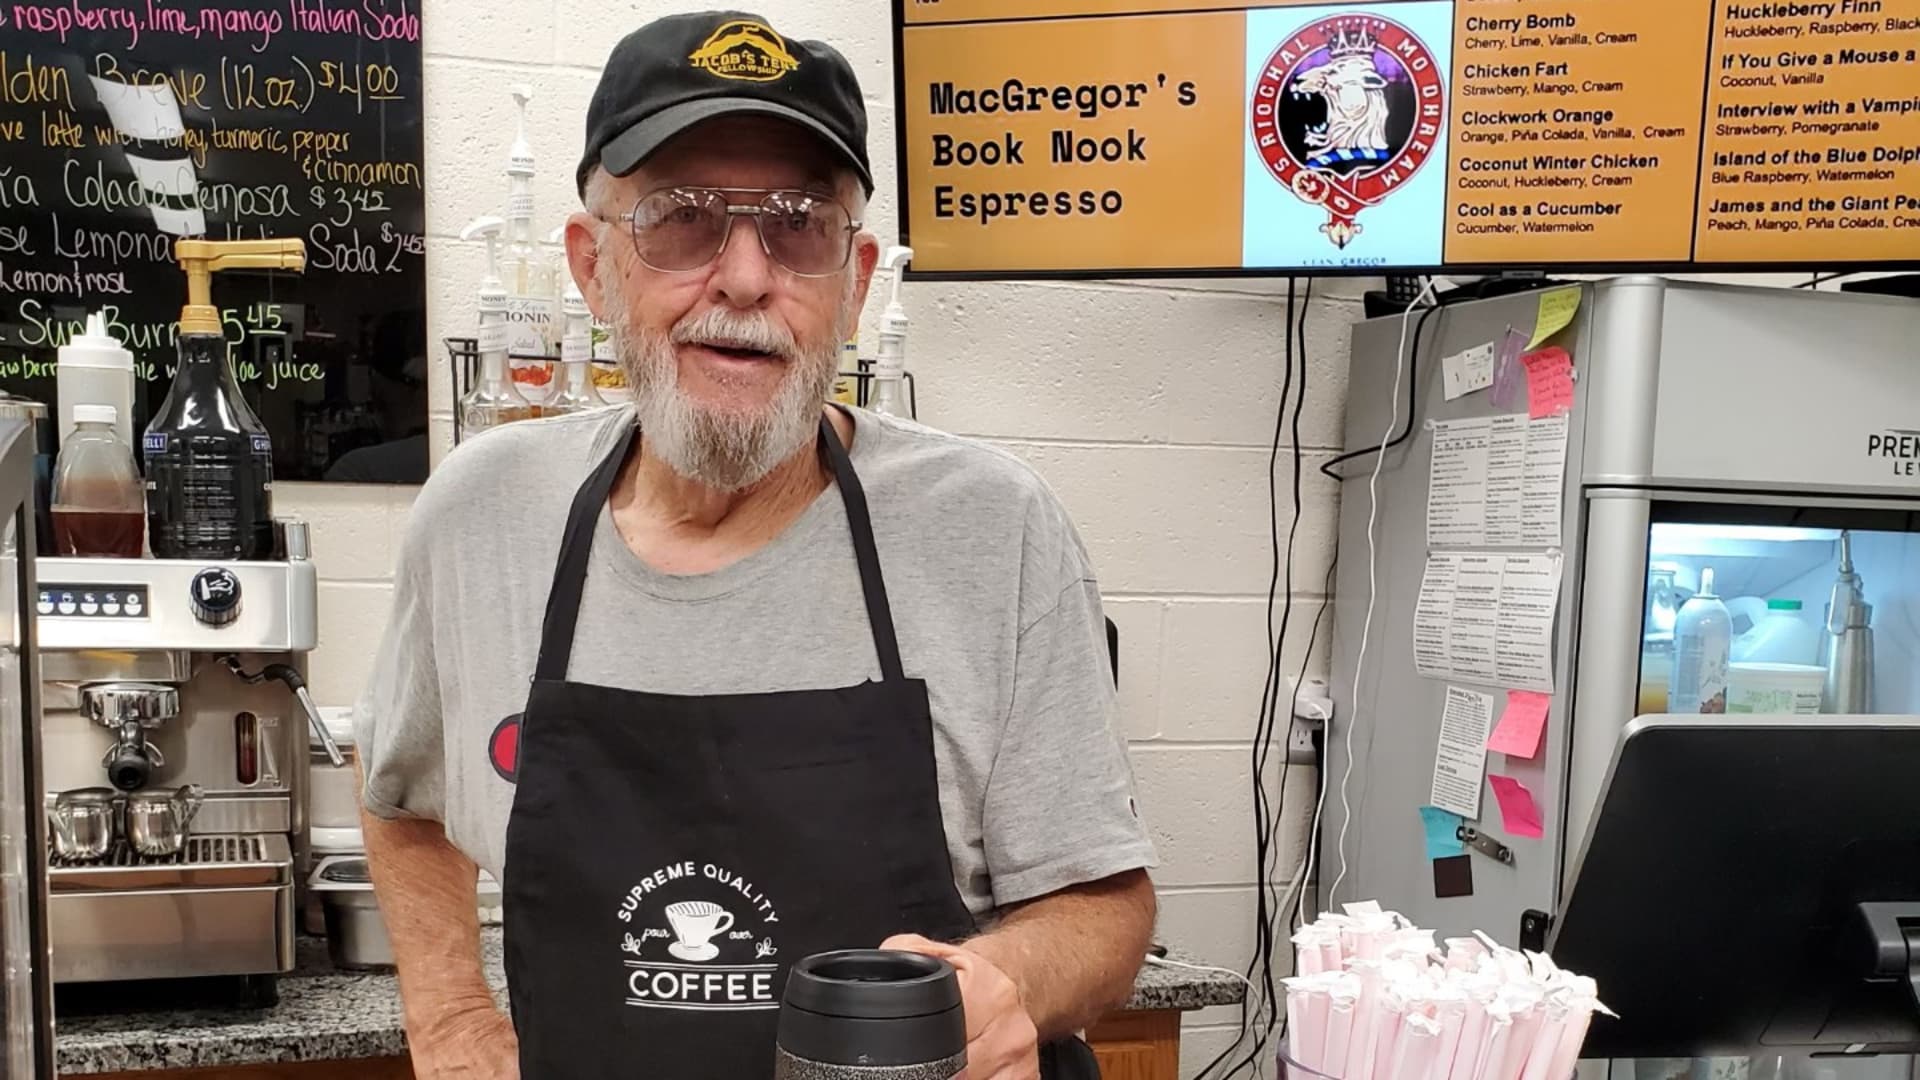 Gibbons working behind the counter in his bookstore's coffee bar. Since opening the bookstore in December 2020, he says the business is almost profitable. For now, it's supported by his JustAnswer income.